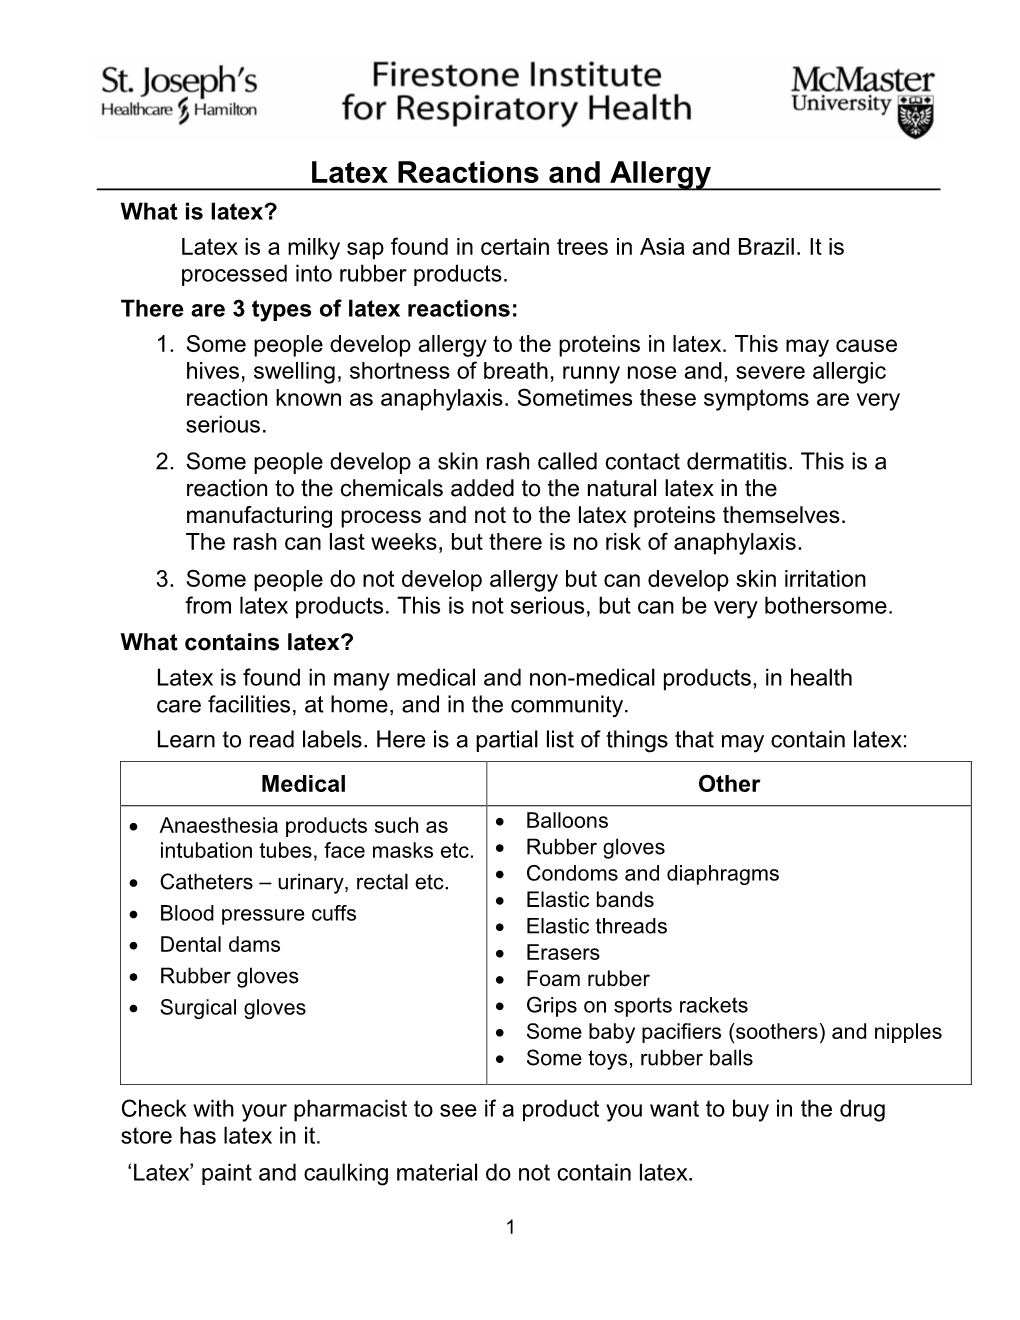 Latex Reactions and Allergy